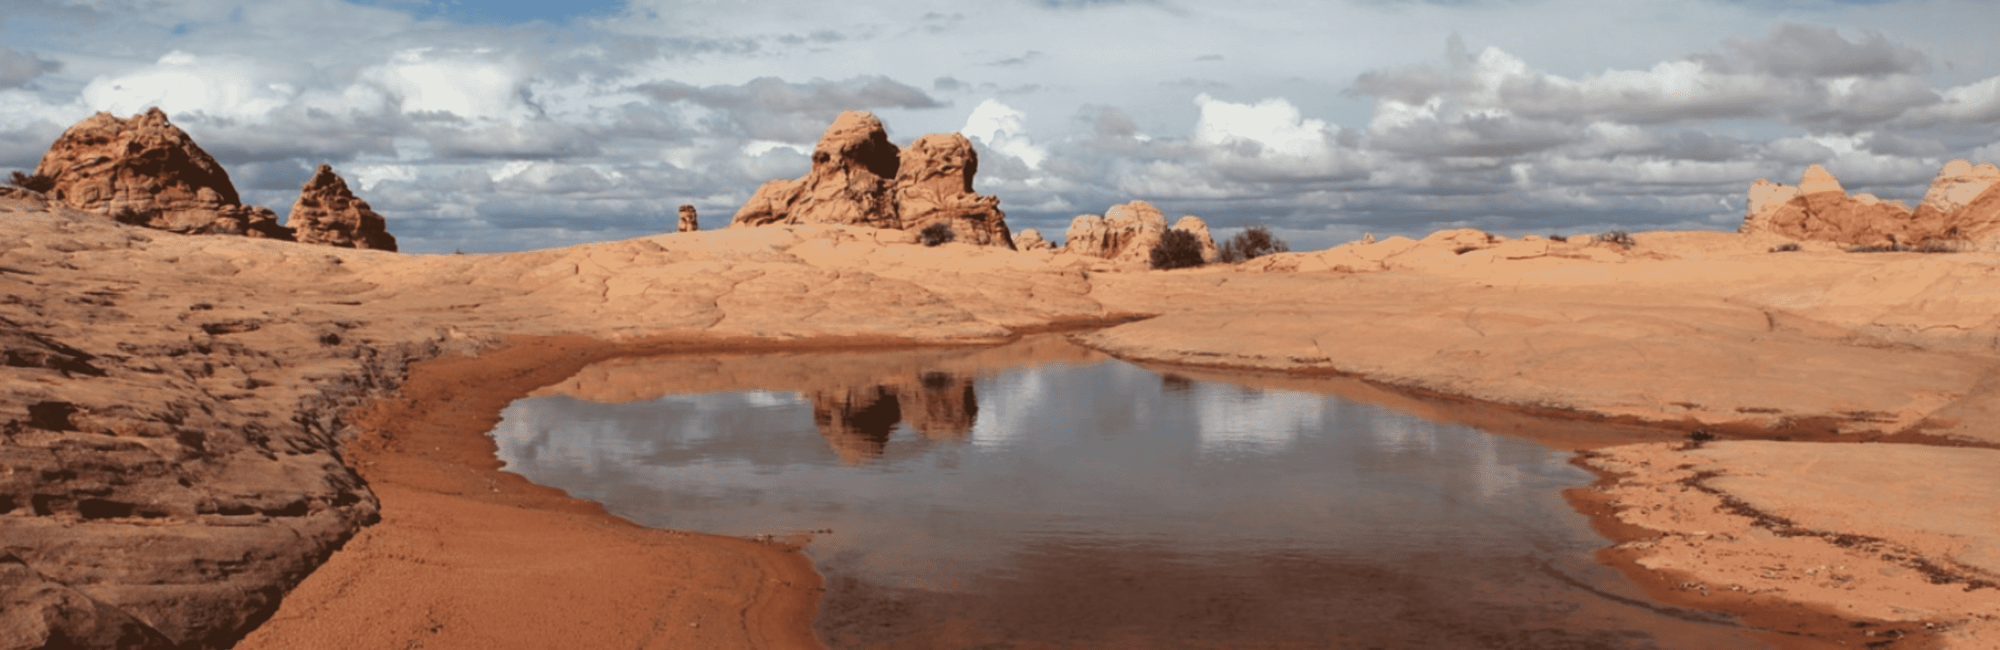 Puddle of water in rocky desert landscape